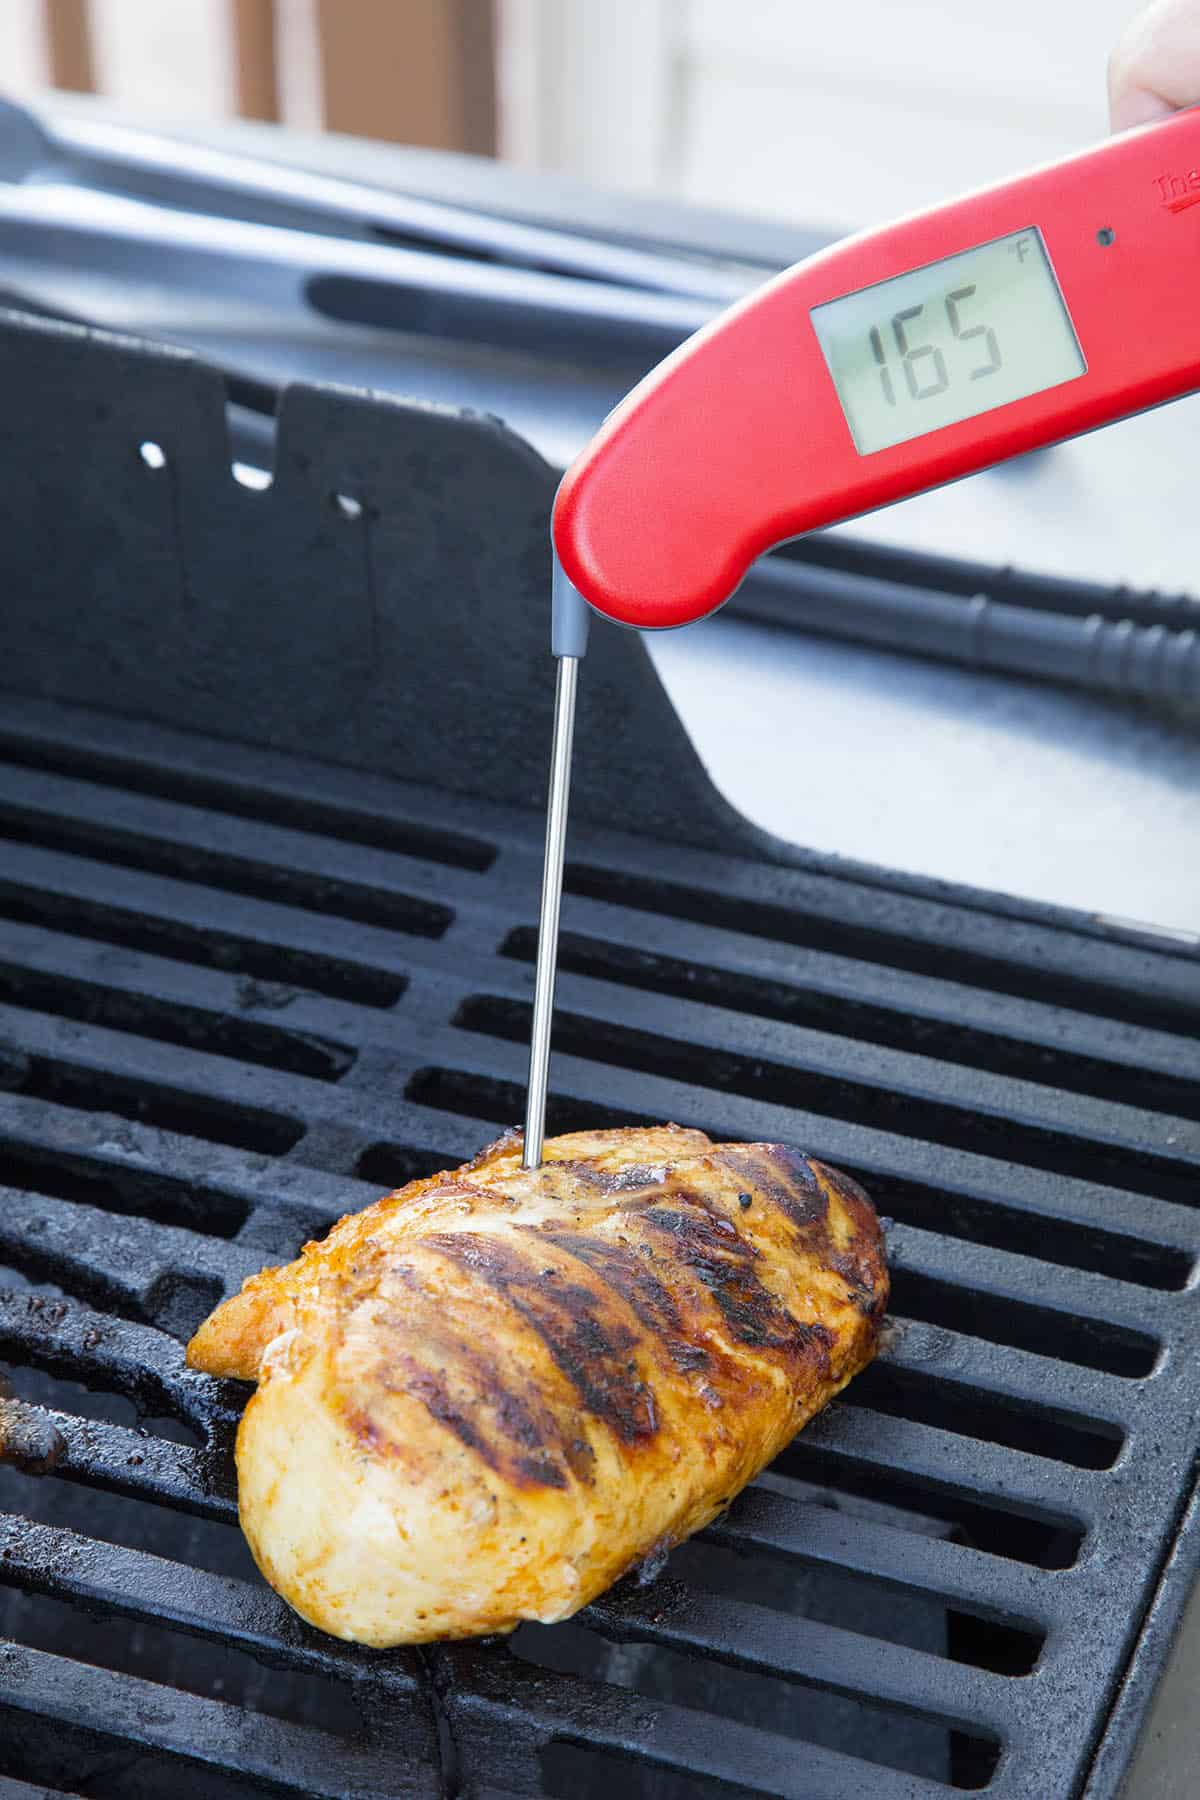 Testing the internal temperature of my grilled chicken